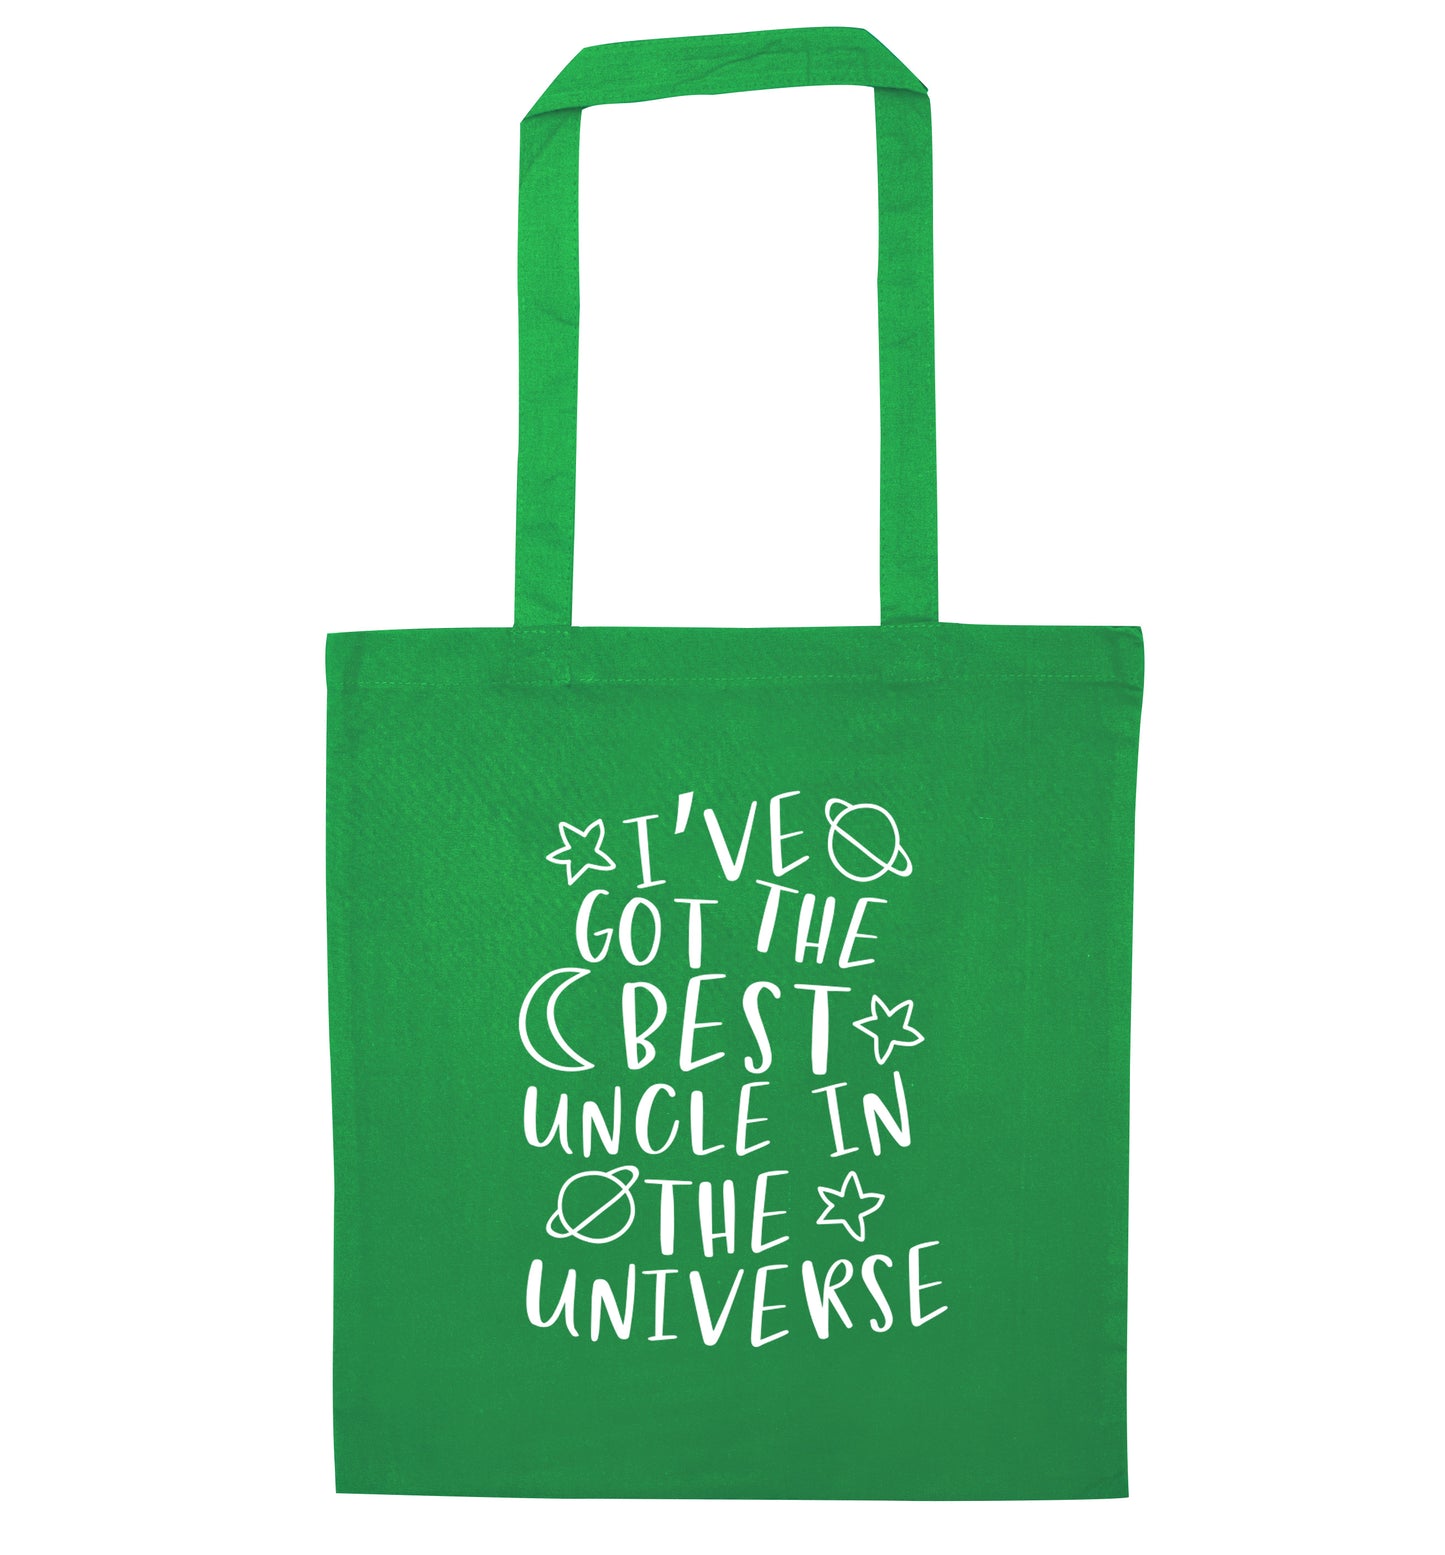 I've got the best uncle in the universe green tote bag